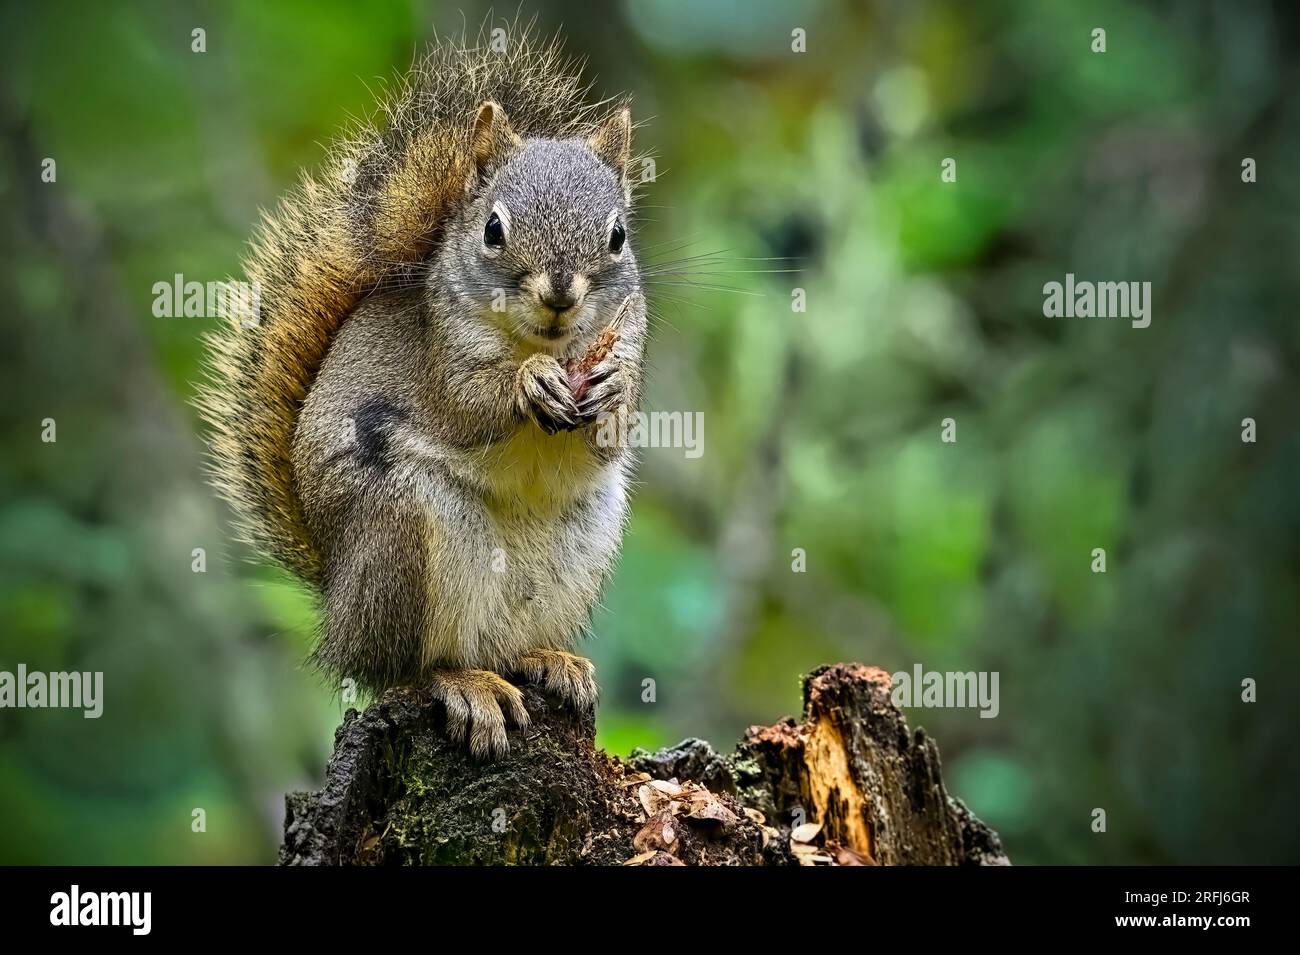 A red squirrel ' Tamiasciurus hudsonicus', sitting on a rotting tree stump in his woodland habitat feeding on spruce cones that he has stored. Stock Photo